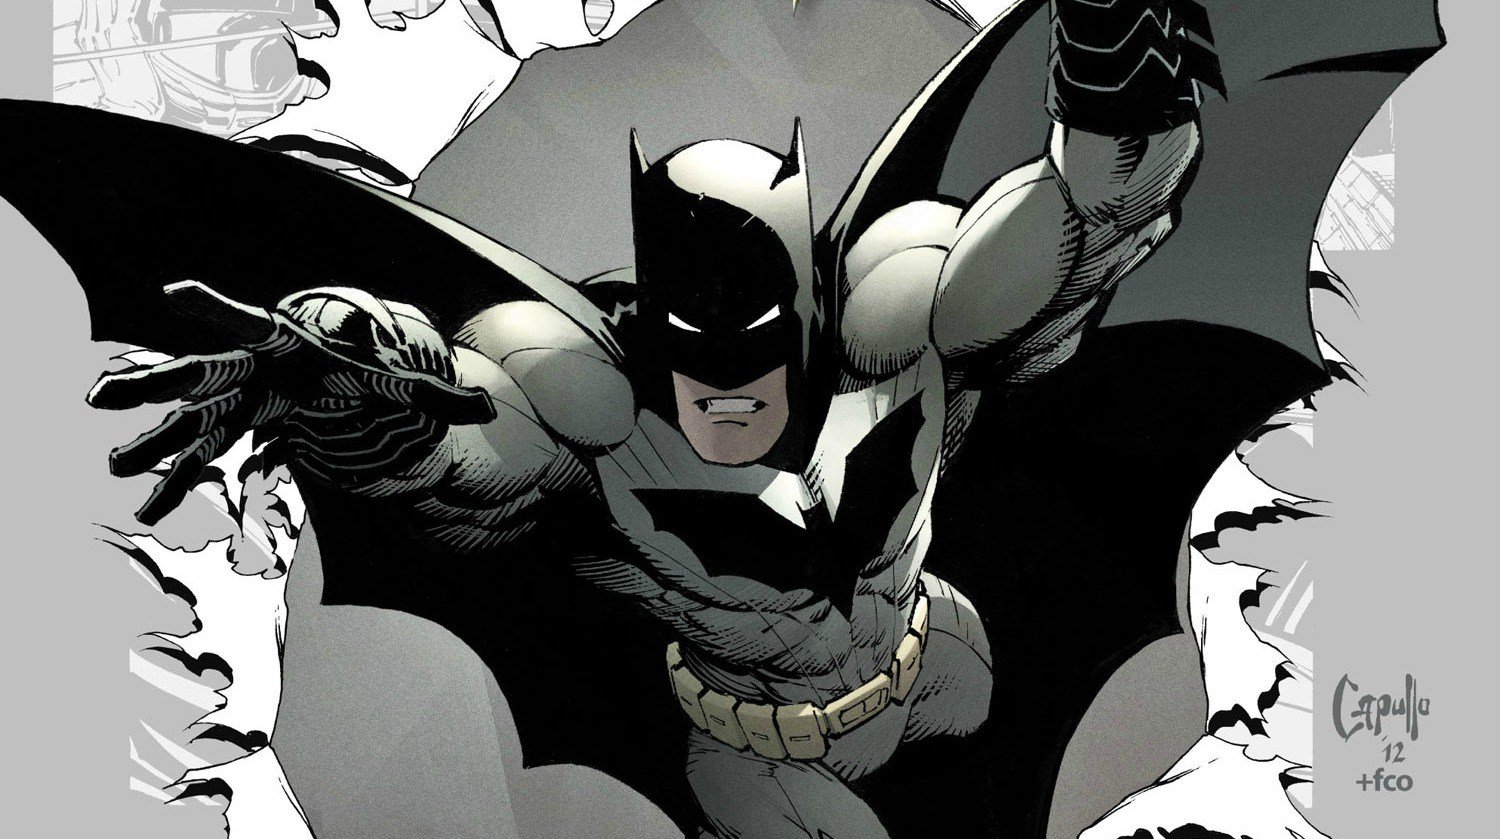 10 Batsuits wed like to see in Batman Vs Superman and Beyond